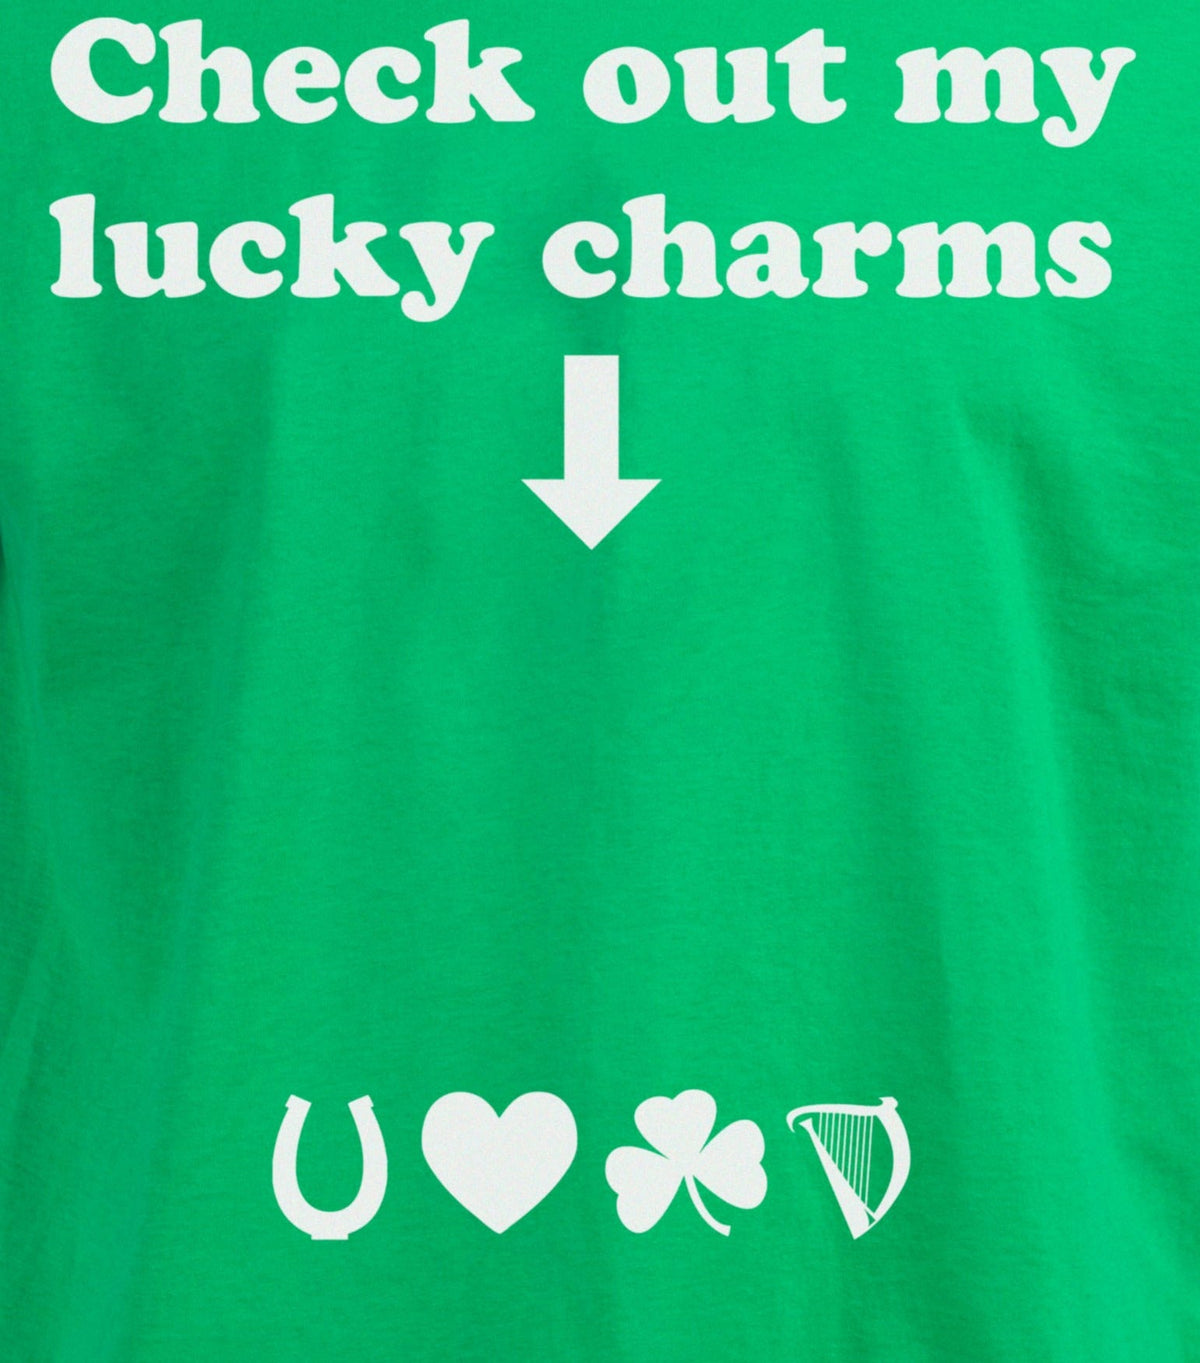 Check Out My Lucky Charms - St. Patrick's Day Raunchy Party T-shirt - Men's/Unisex